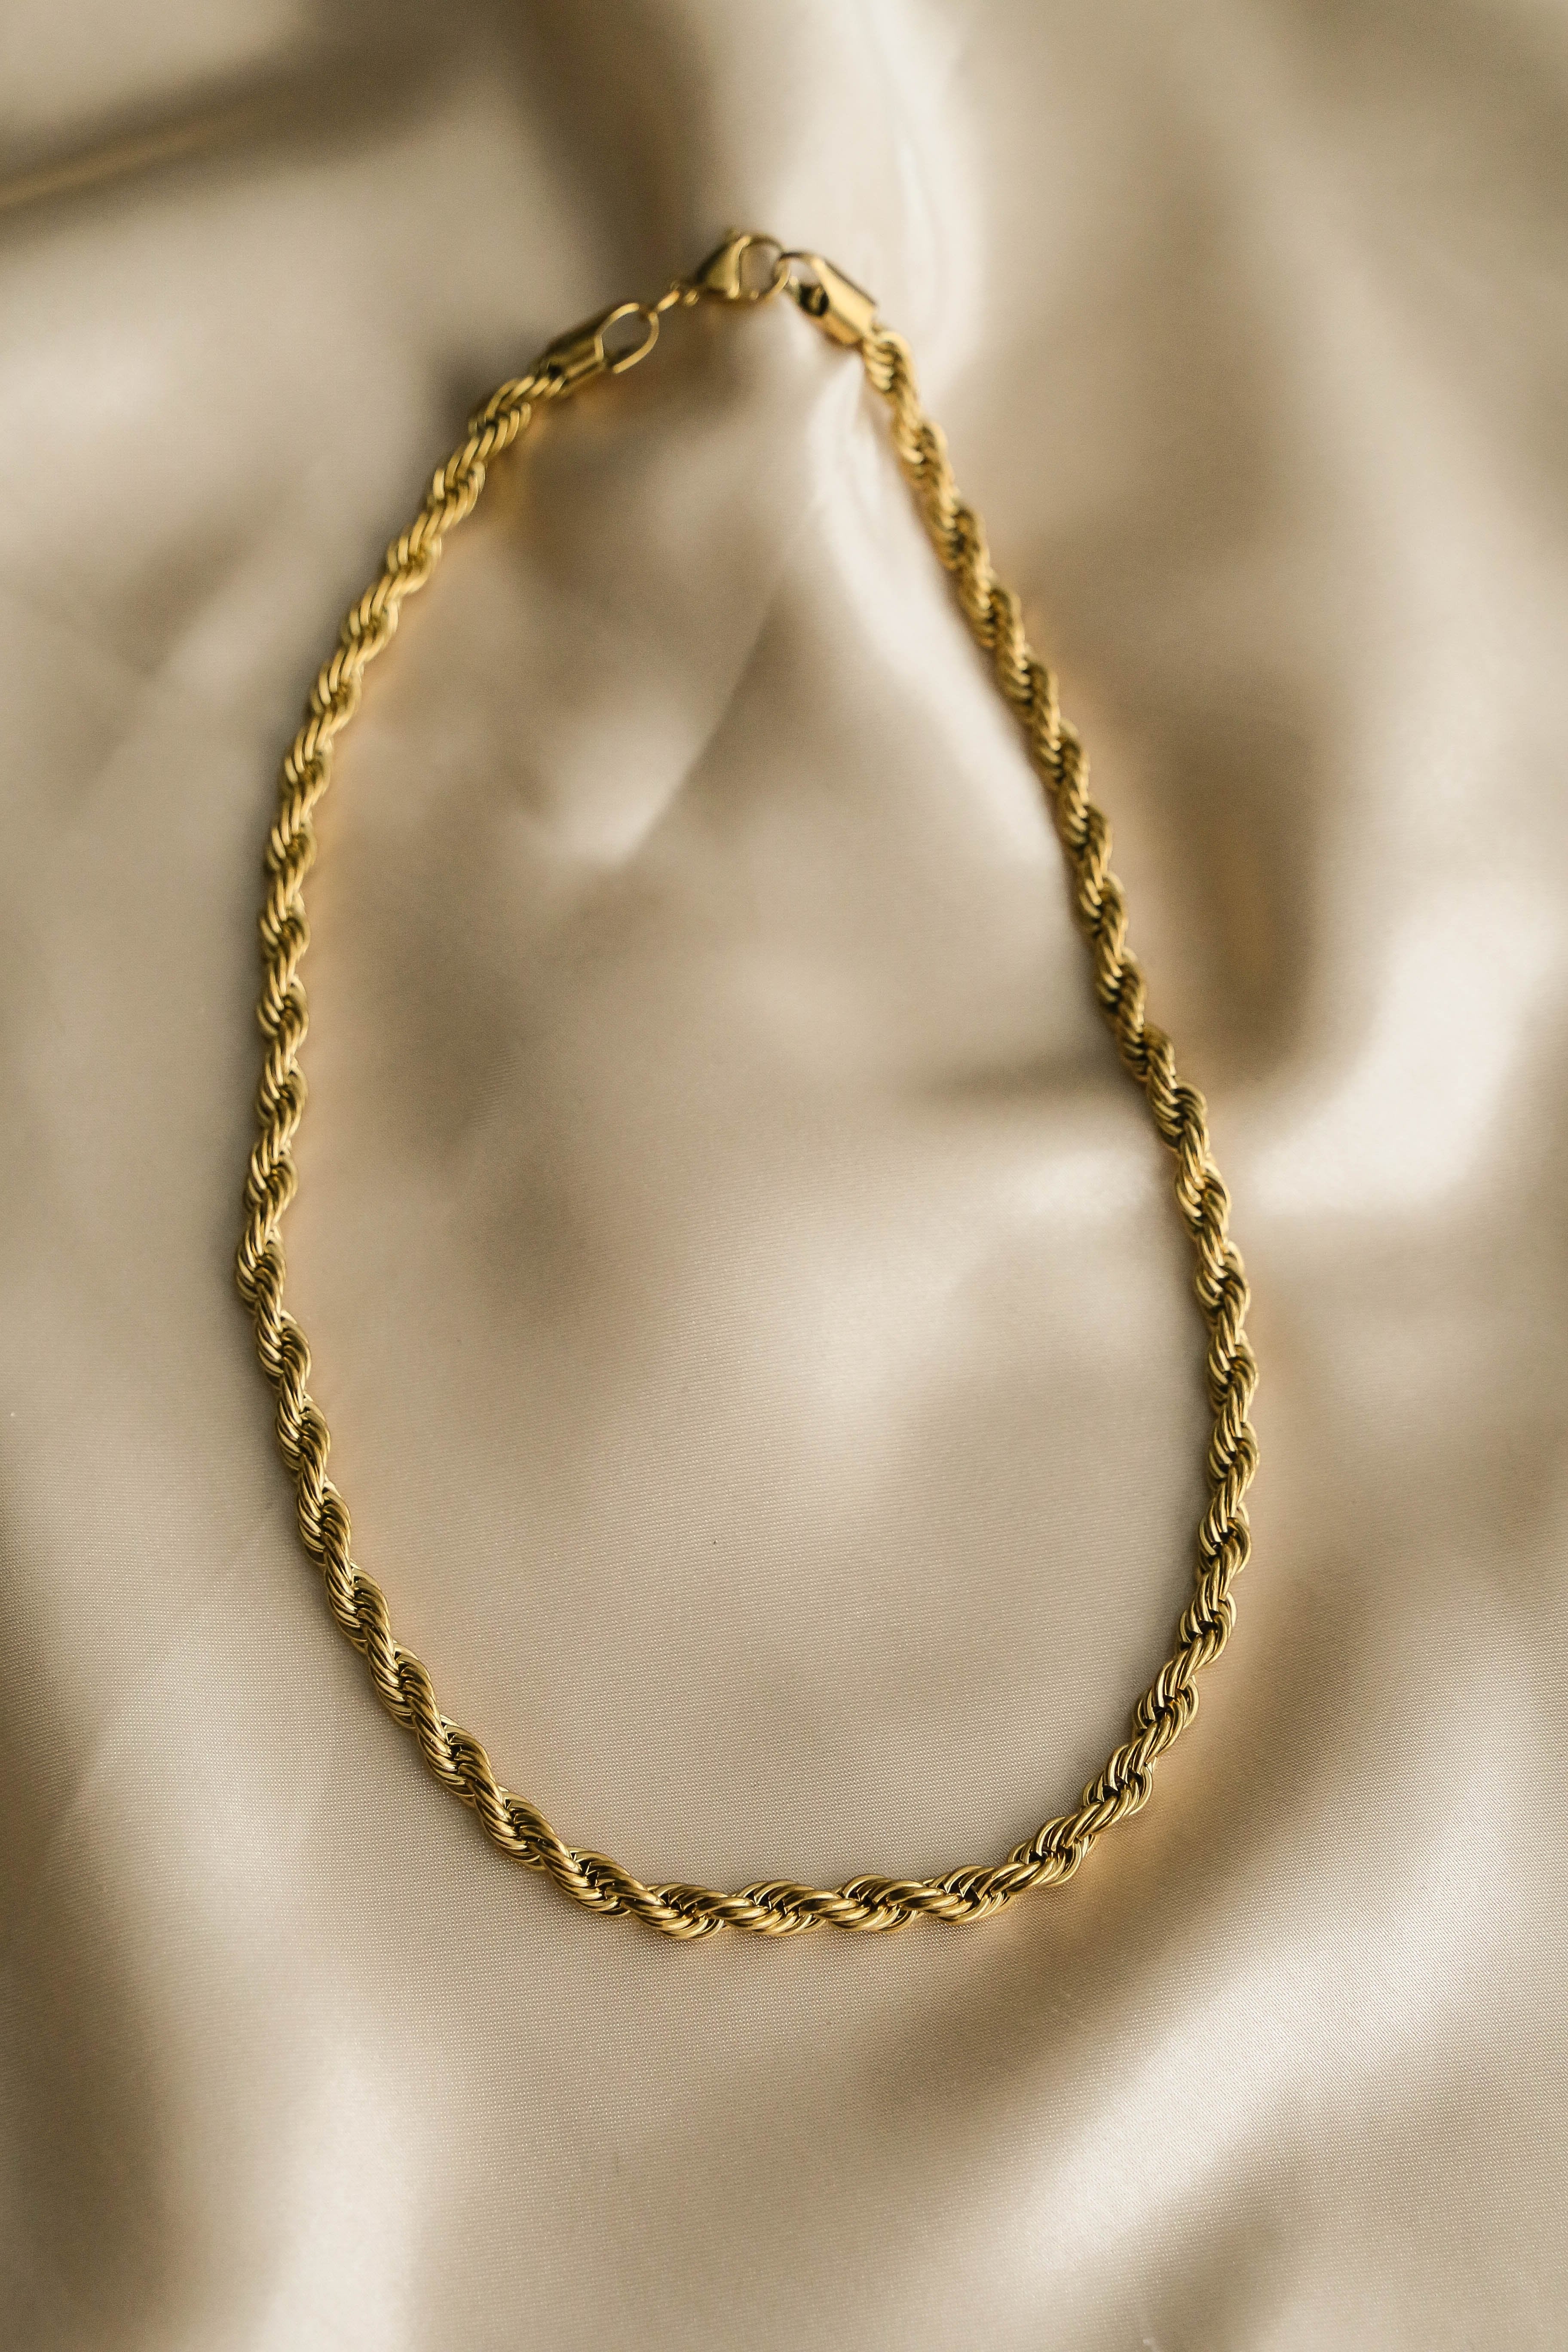 Lola Necklace - Boutique Minimaliste has waterproof, durable, elegant and vintage inspired jewelry